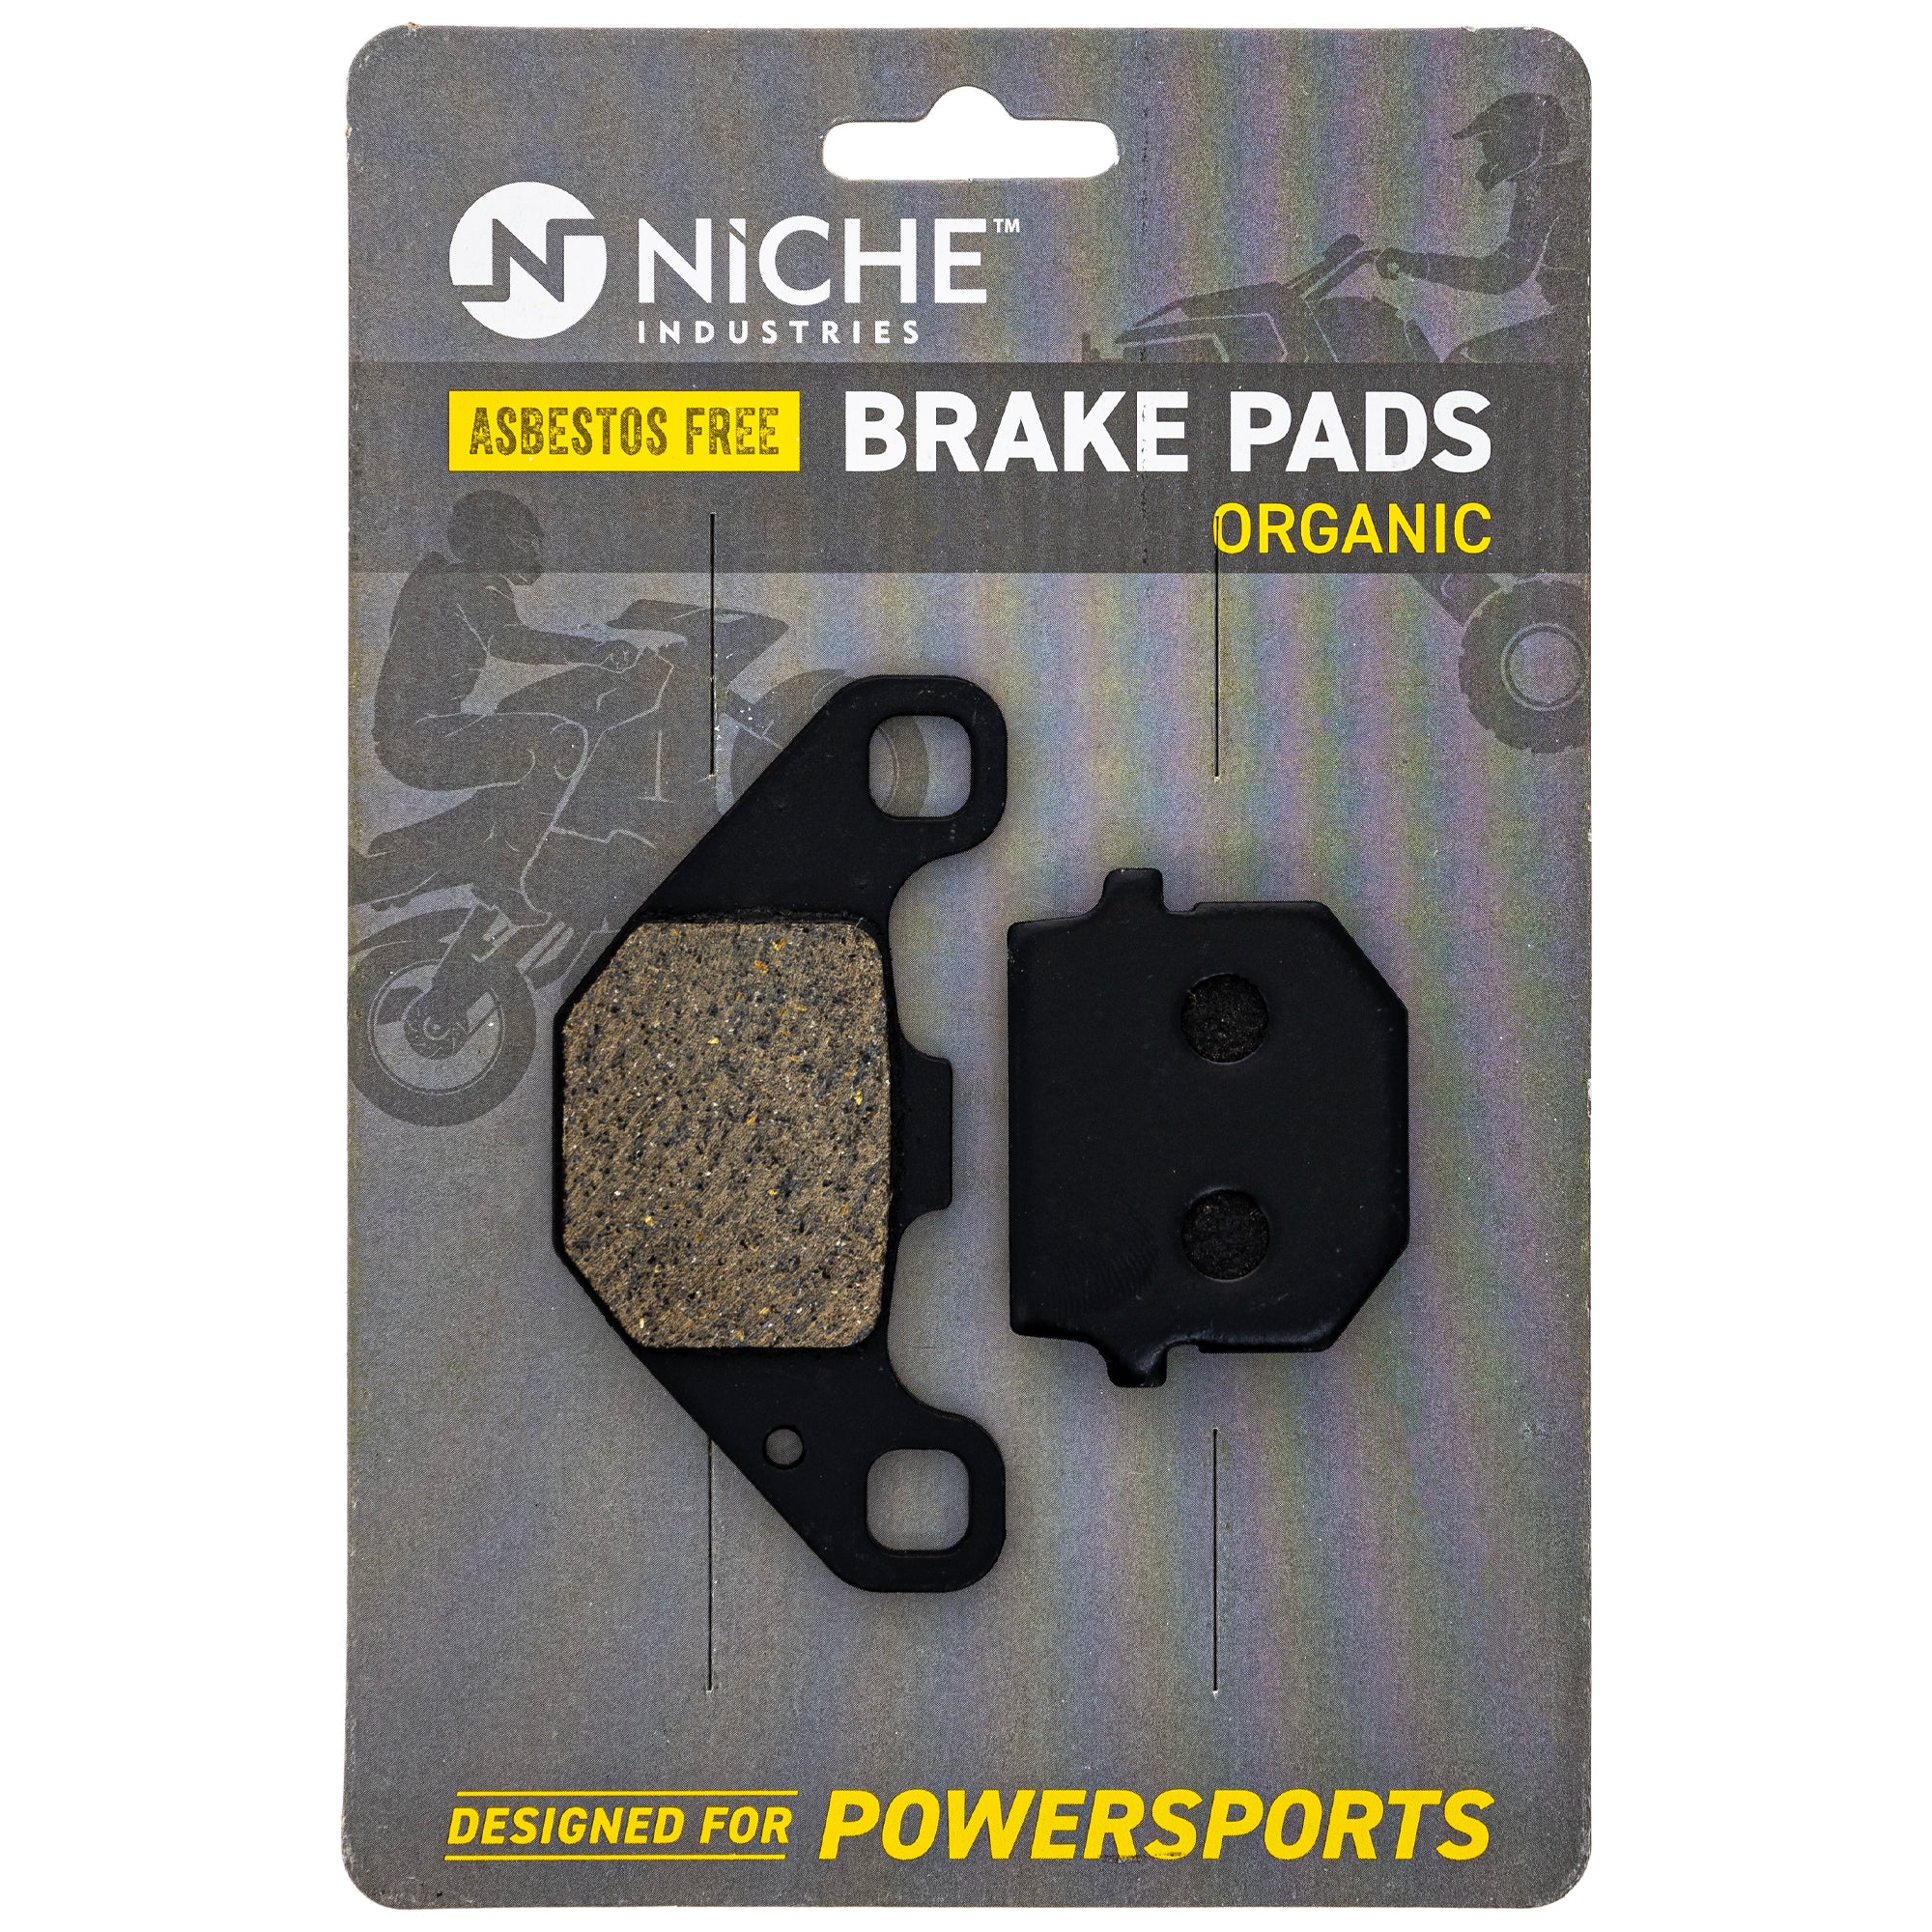 Brake Pad Kit for Yamaha Grizzly 300 1SC-F5805-00-00 Front Rear